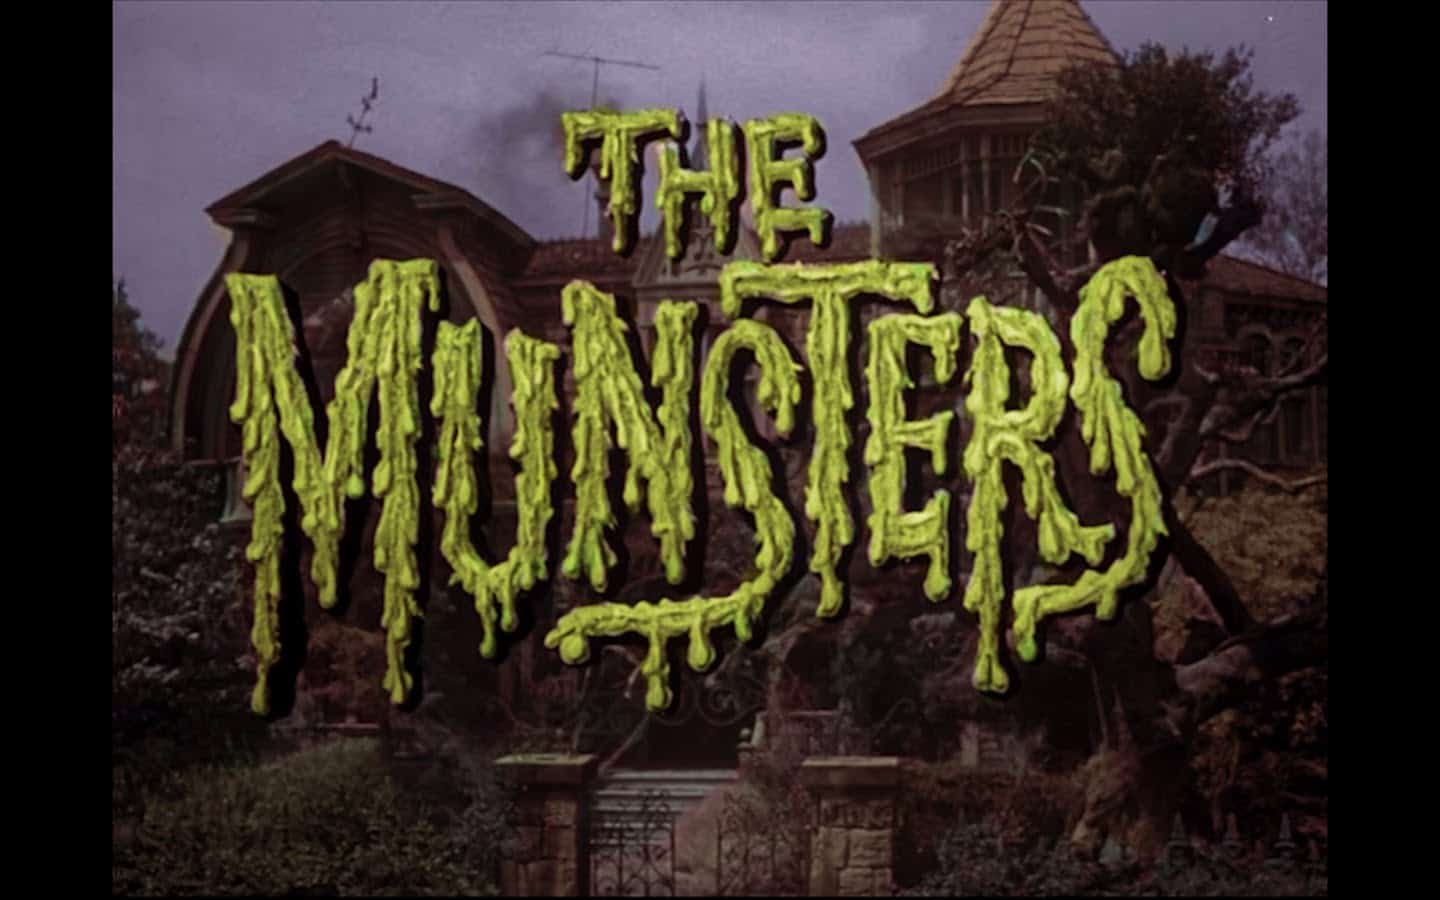 Original "The Munsters" und "The Addams Family" in Farbe